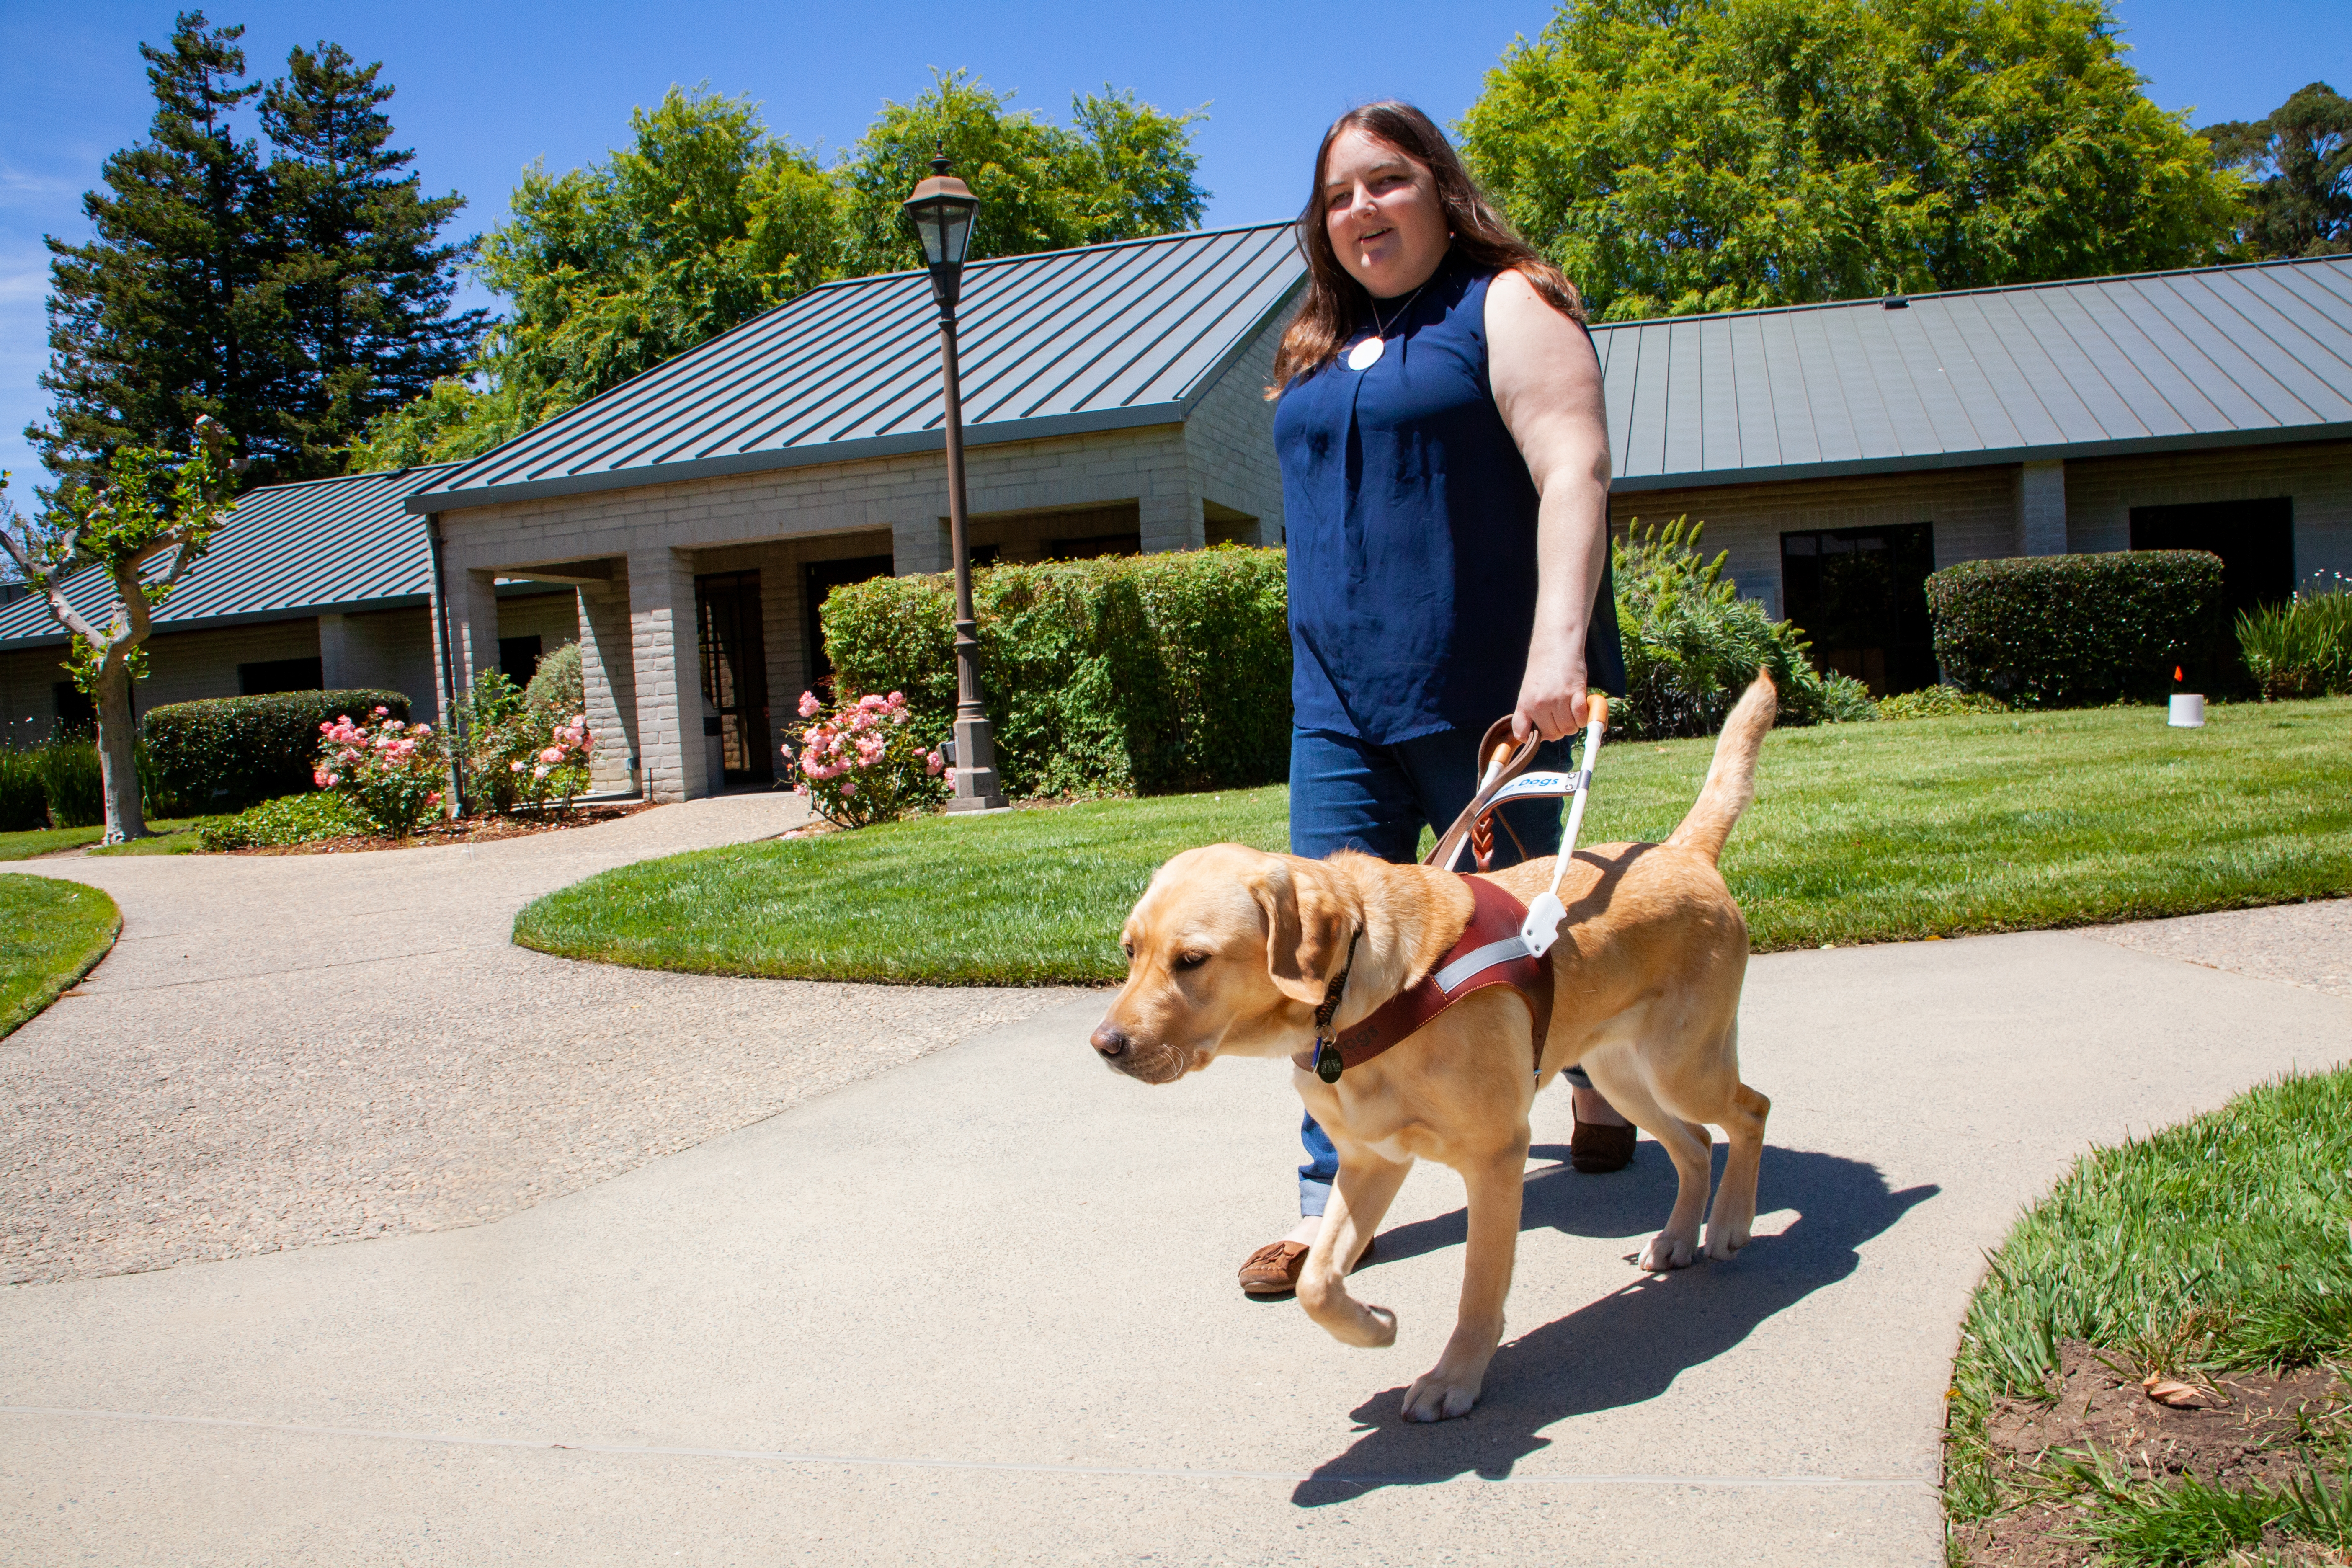 Claire and yellow Lab guide dog Tulane walk through the CA campus of Guide Dogs for the Blind on a bright sunny day.